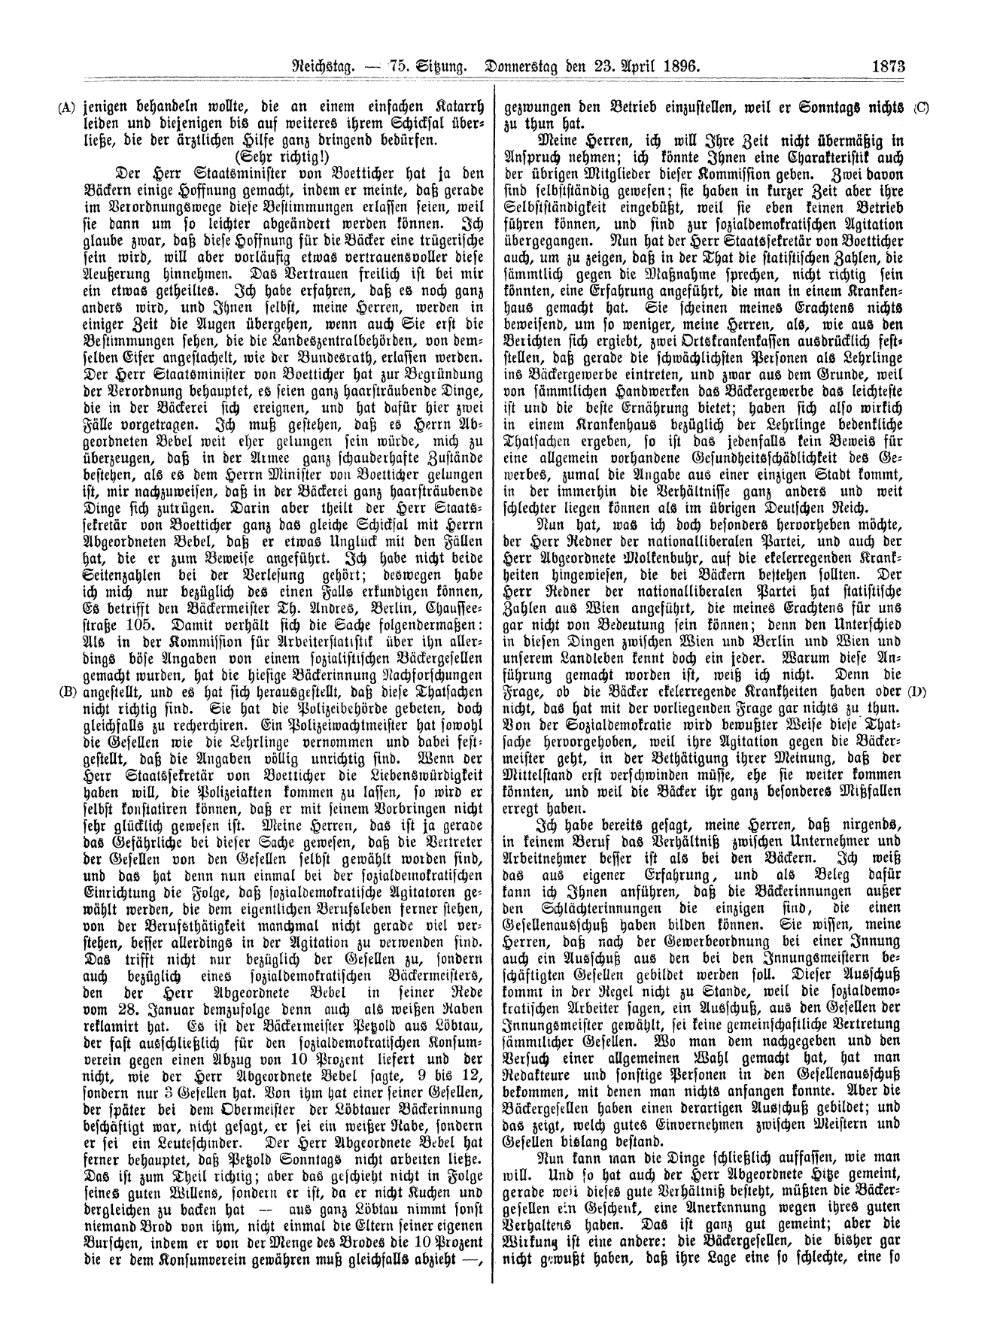 Scan of page 1873